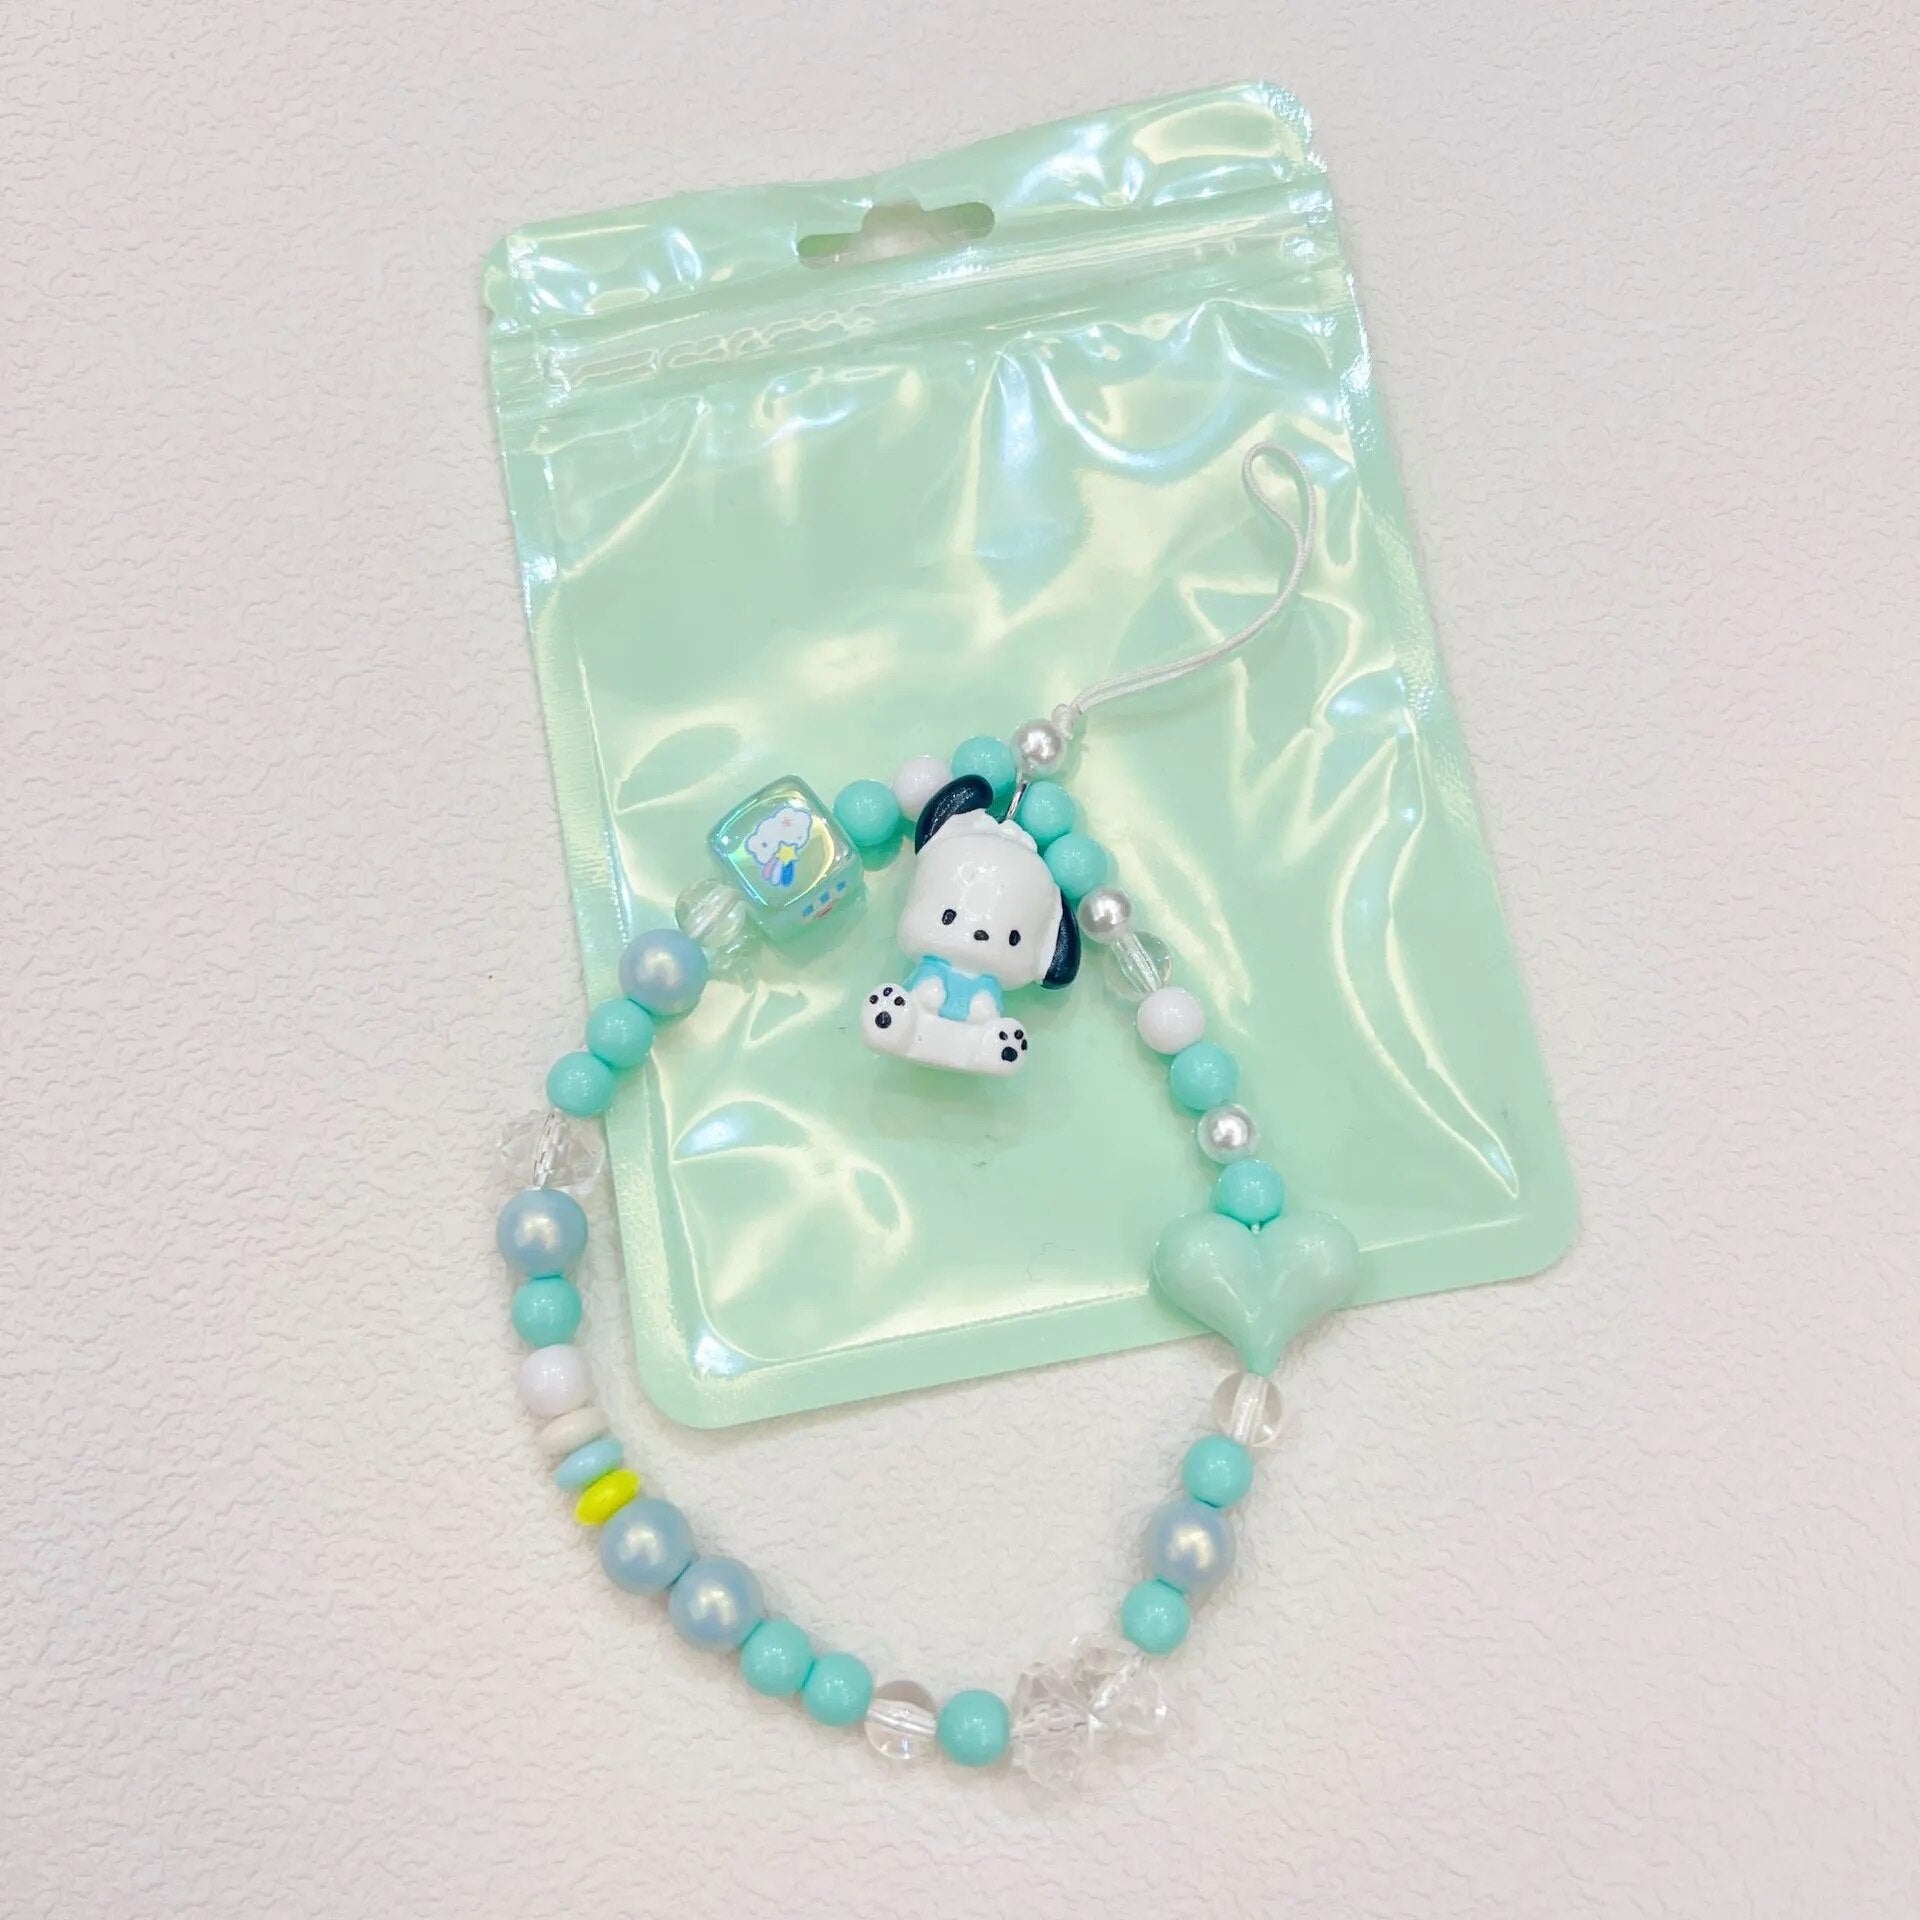 Sanrio Kuromi My Melody Doll Pendant Bracelet - Kawaii Stop - Backpack Accessory, Bracelet, Bracelets, CE Certified, Collectible, Cute, Doll Pendant, Durable, Finished Goods, Gift, In-Stock, Kawaii, Keychain, Mobile Phone Chain, Movie & TV Theme, Plastic, Sanrio, Summer, Unisex, Versatile